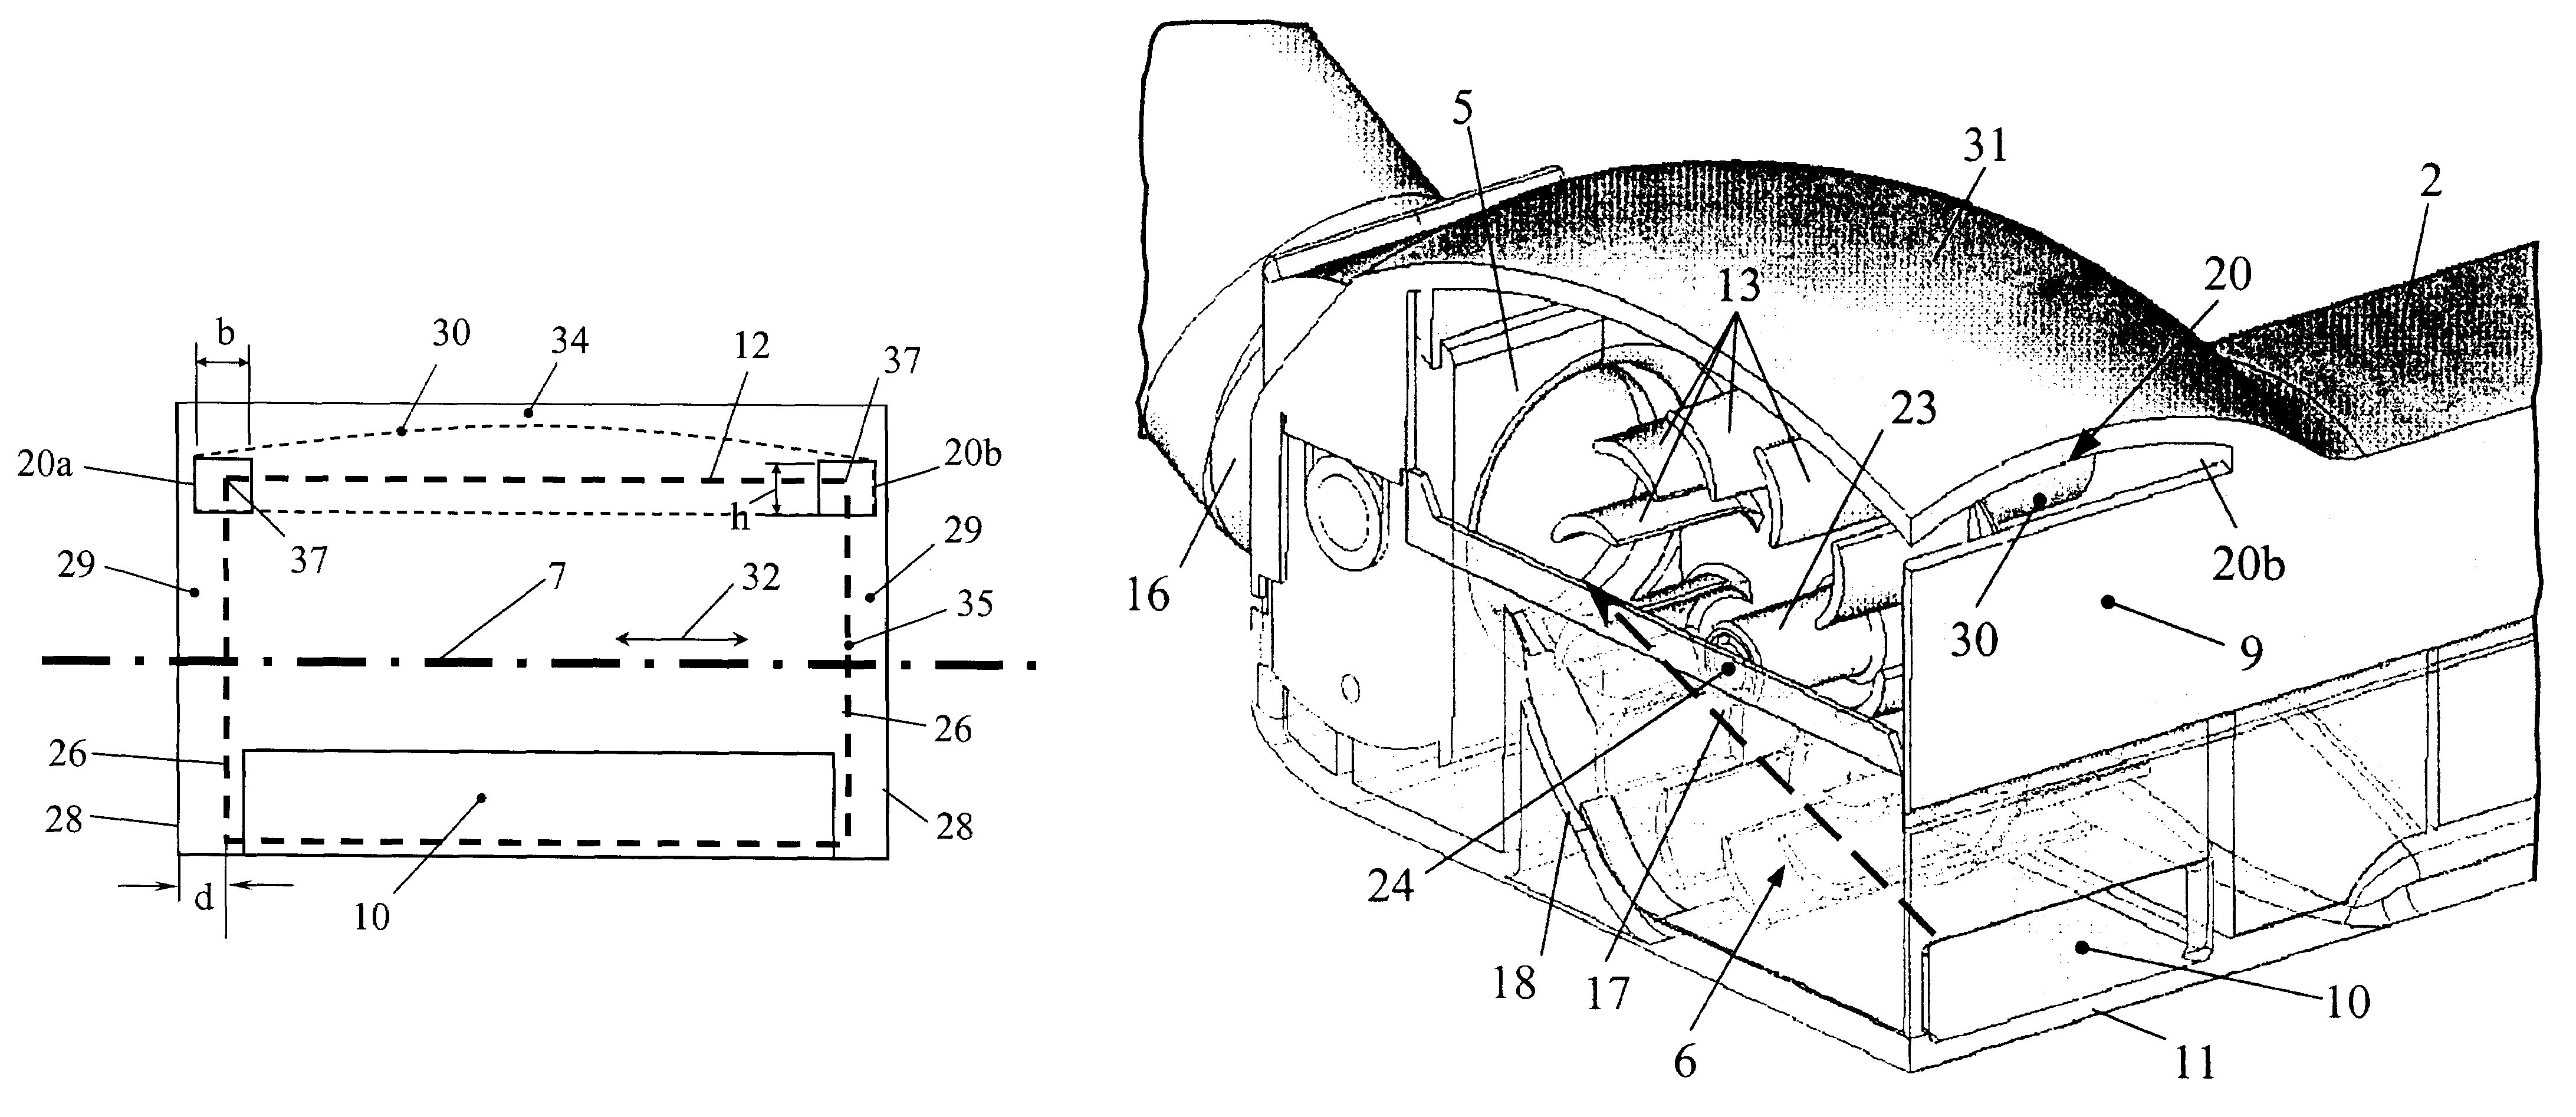 Vacuum cleaning tool having an air turbine with stabilizing air stream